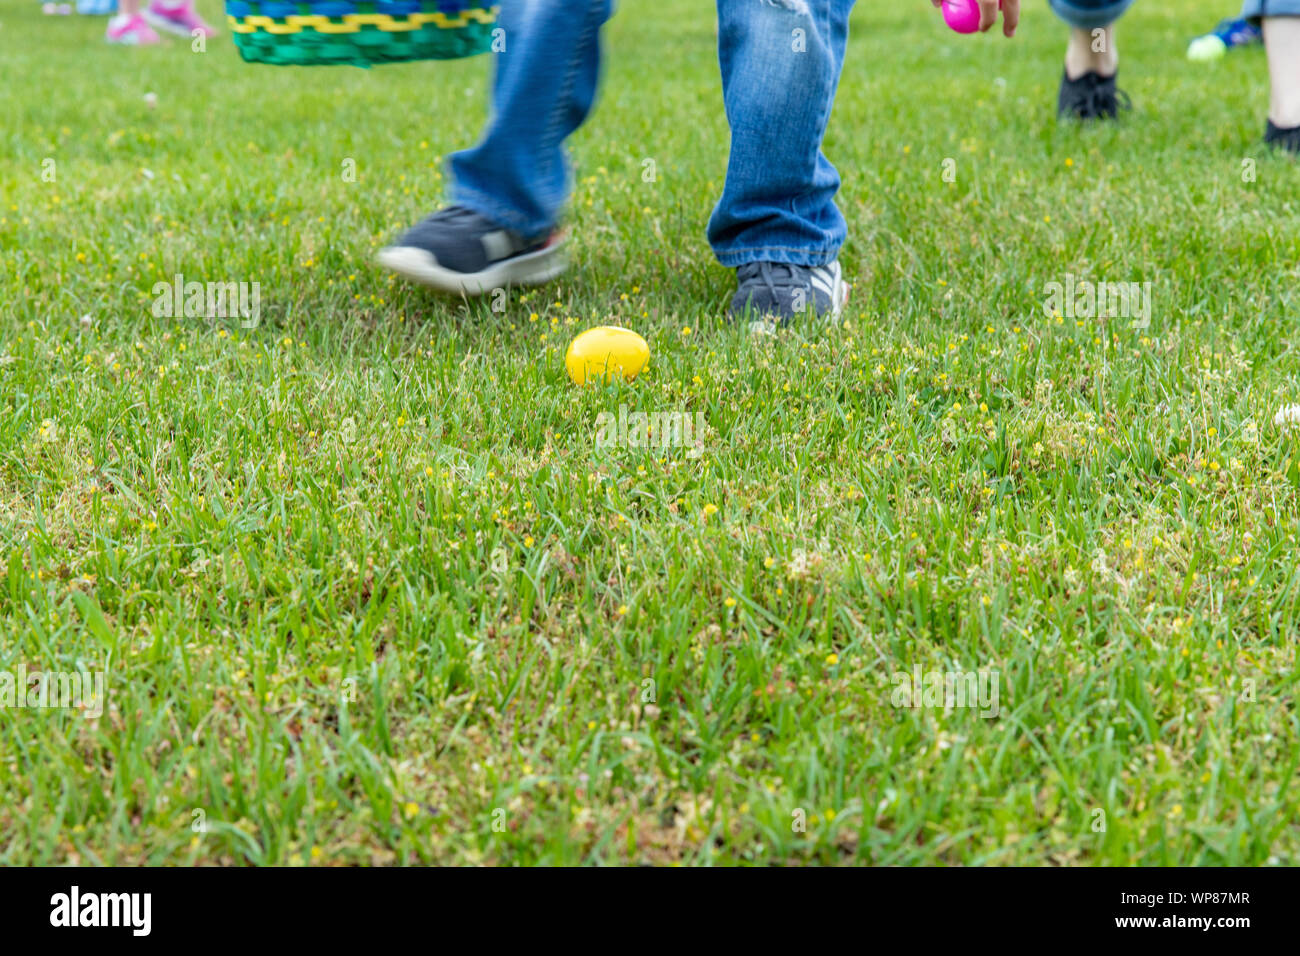 Children hunting for easter eggs in grass, copy space Stock Photo